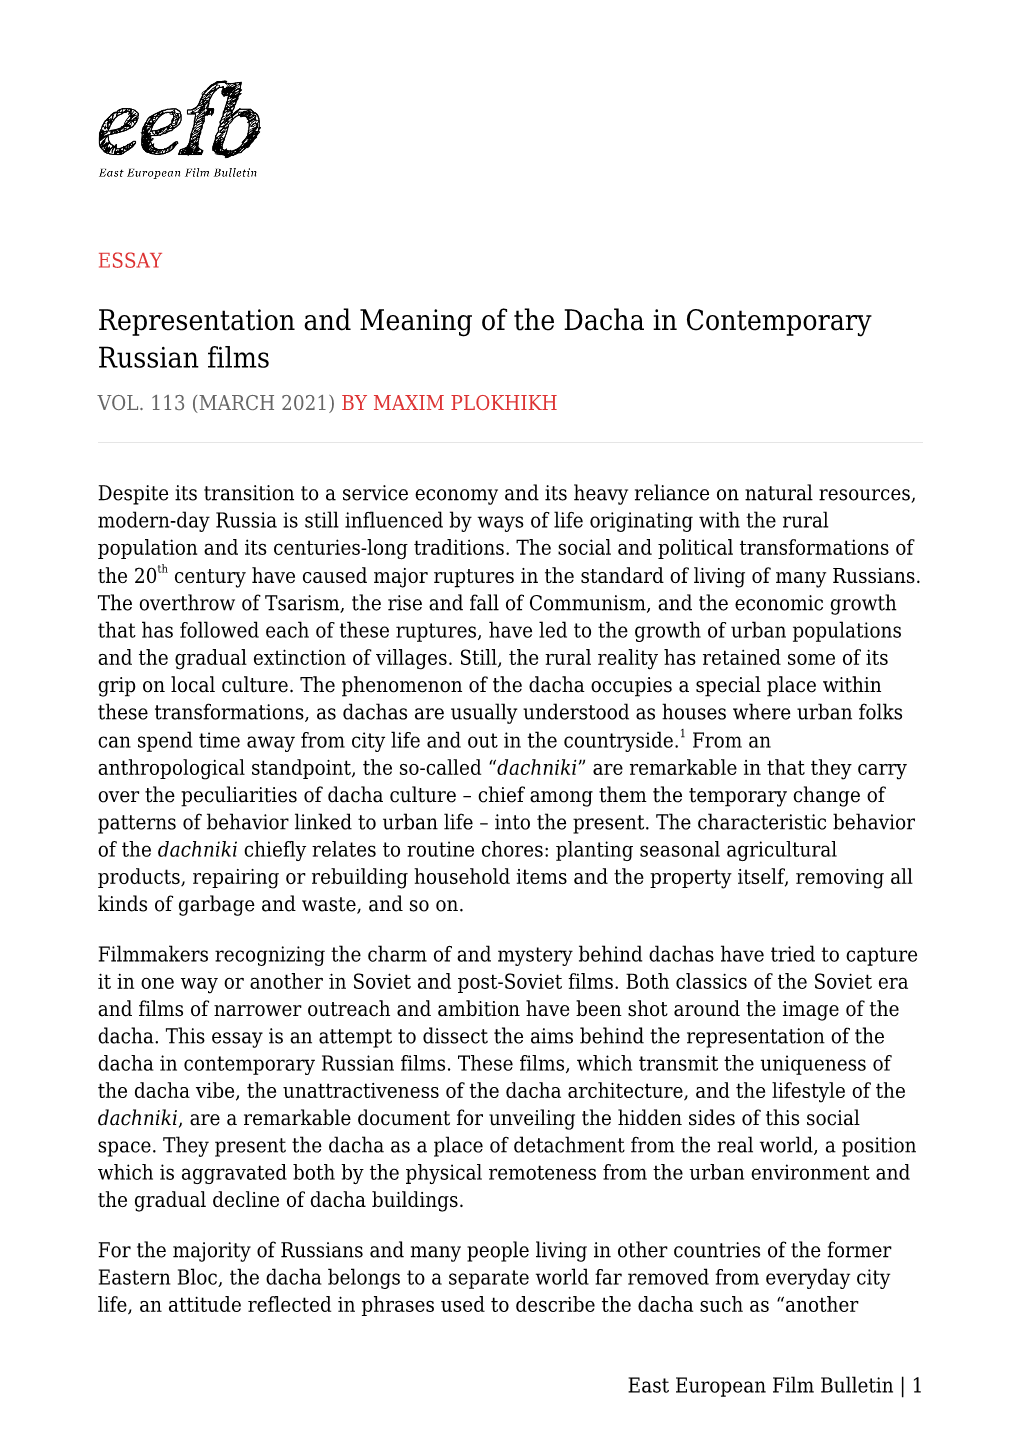 Representation and Meaning of the Dacha in Contemporary Russian Films VOL